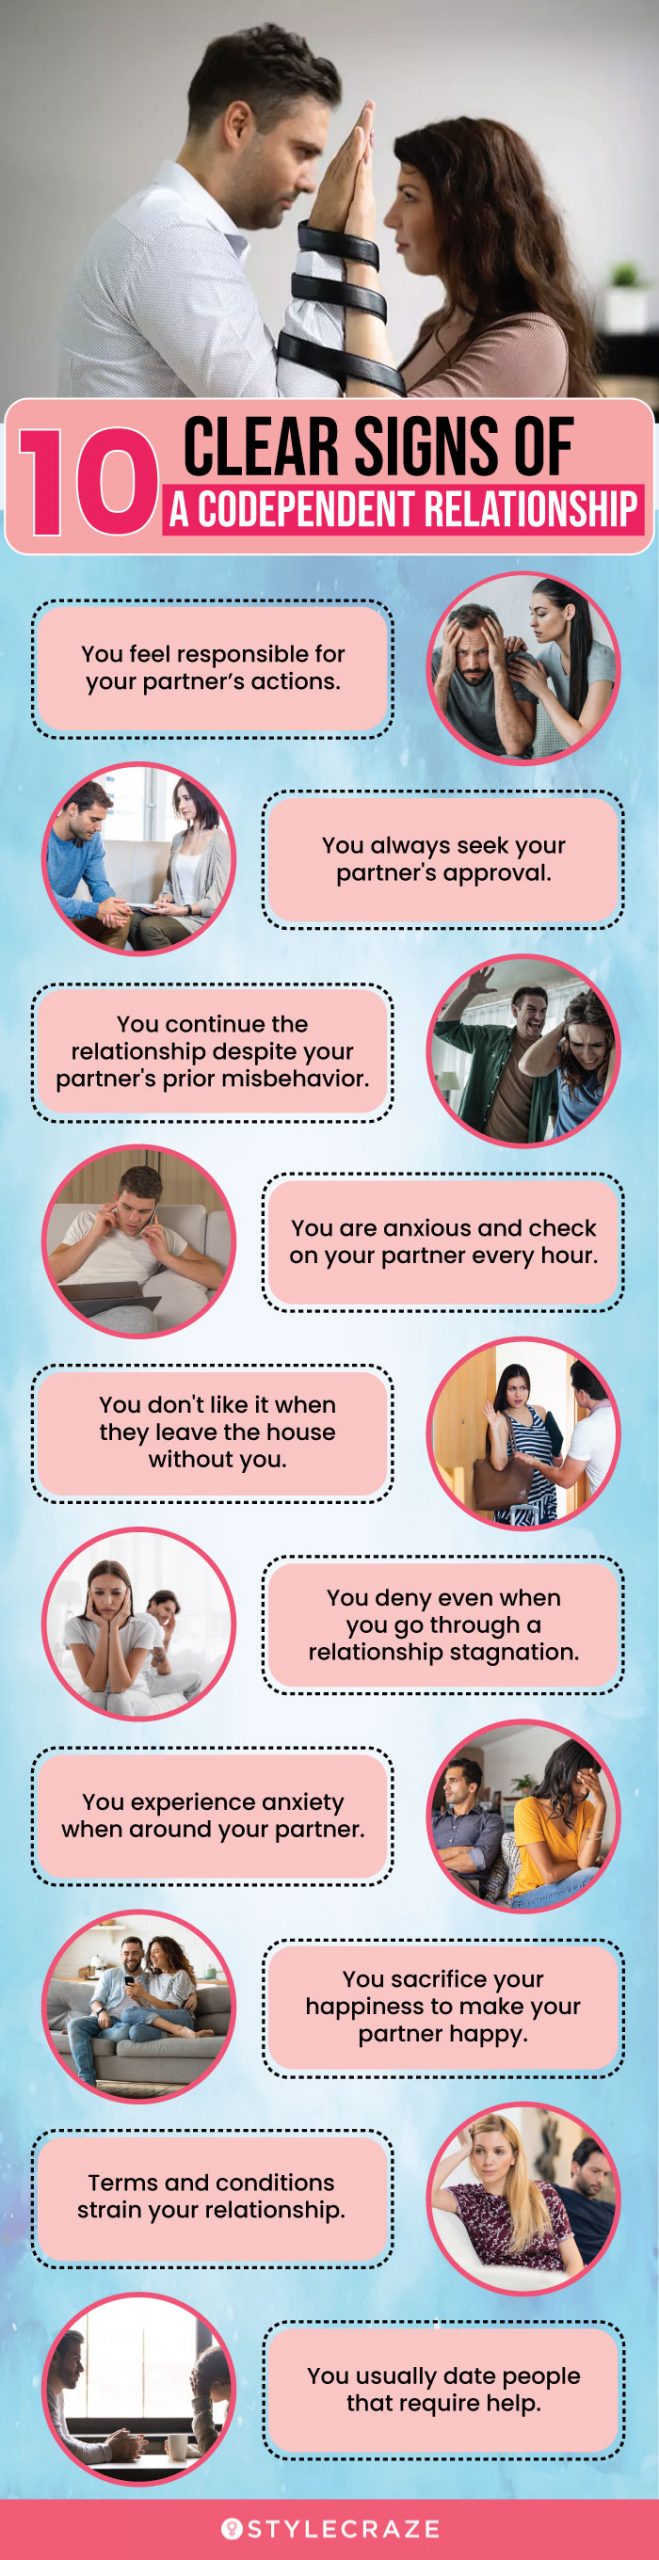 10 clear signs of a codependent relationship (infographic)